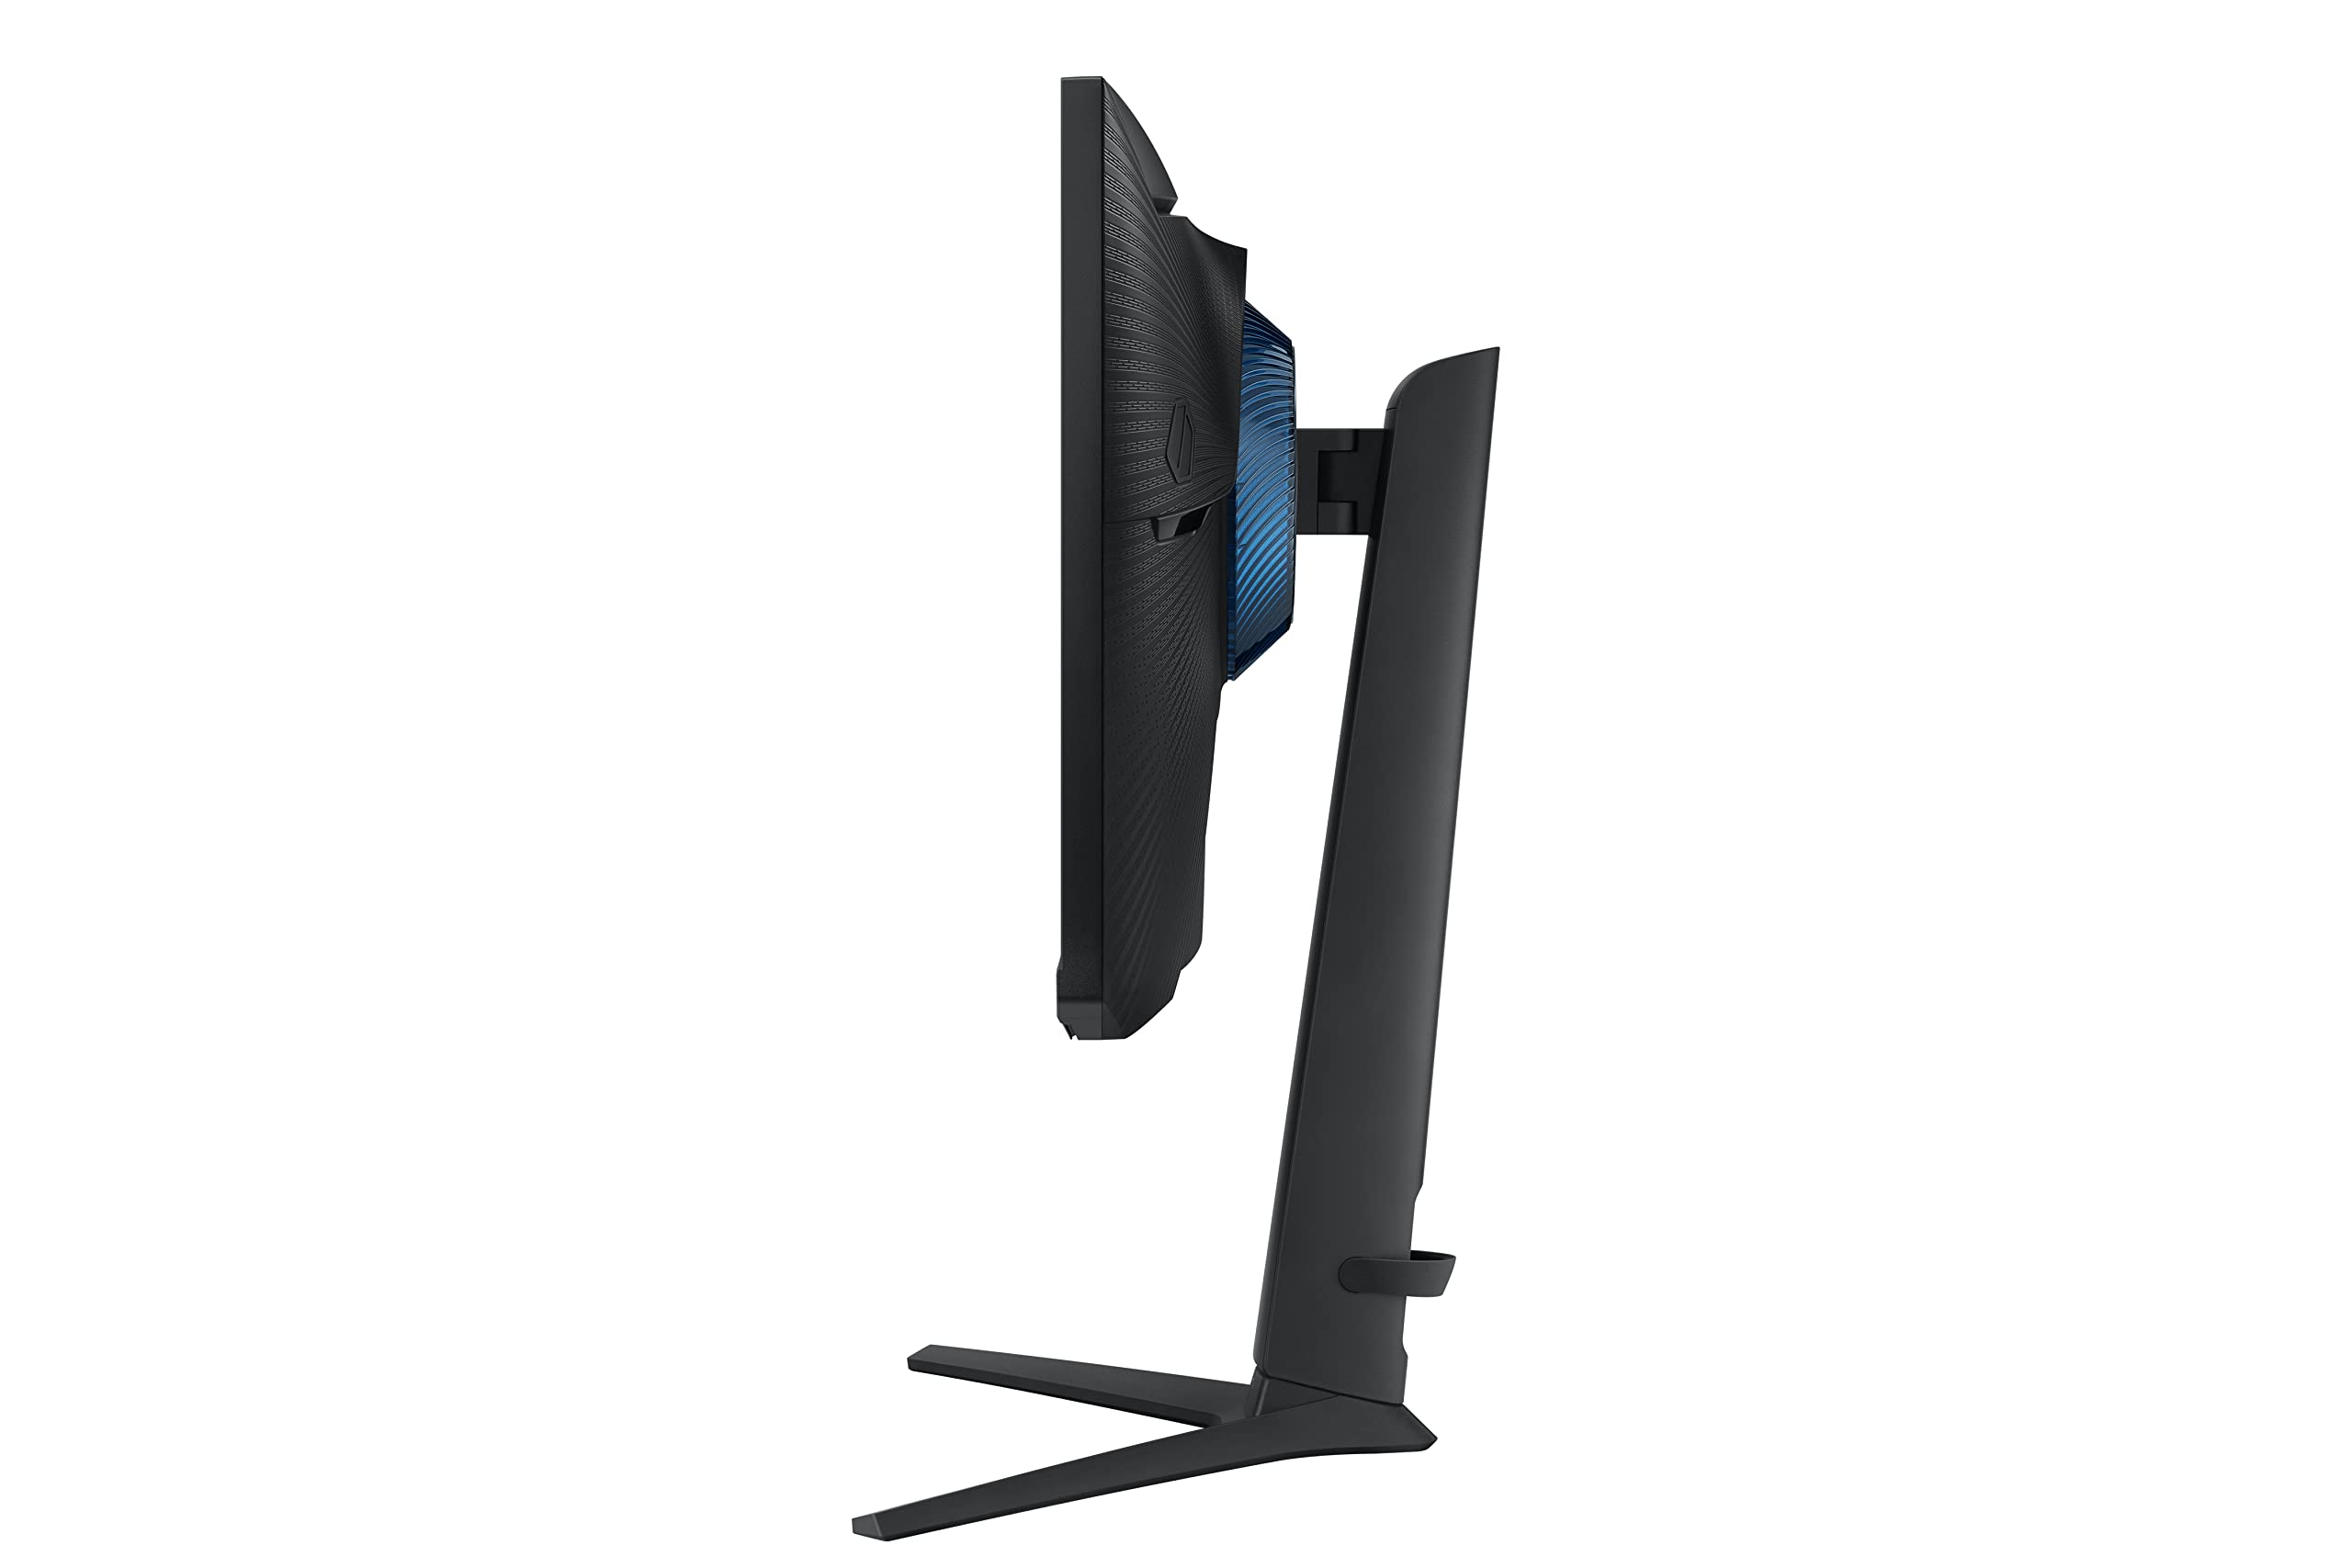 SAMSUNG Odyssey G4 Series 25-Inch FHD Gaming Monitor, IPS, 240Hz, 1ms, G-Sync Compatible, AMD FreeSync Premium, HDR10, Ultrawide Game View, DisplayPort, HDMI, Fully Adjustable Stand (LS25BG402ENXGO)